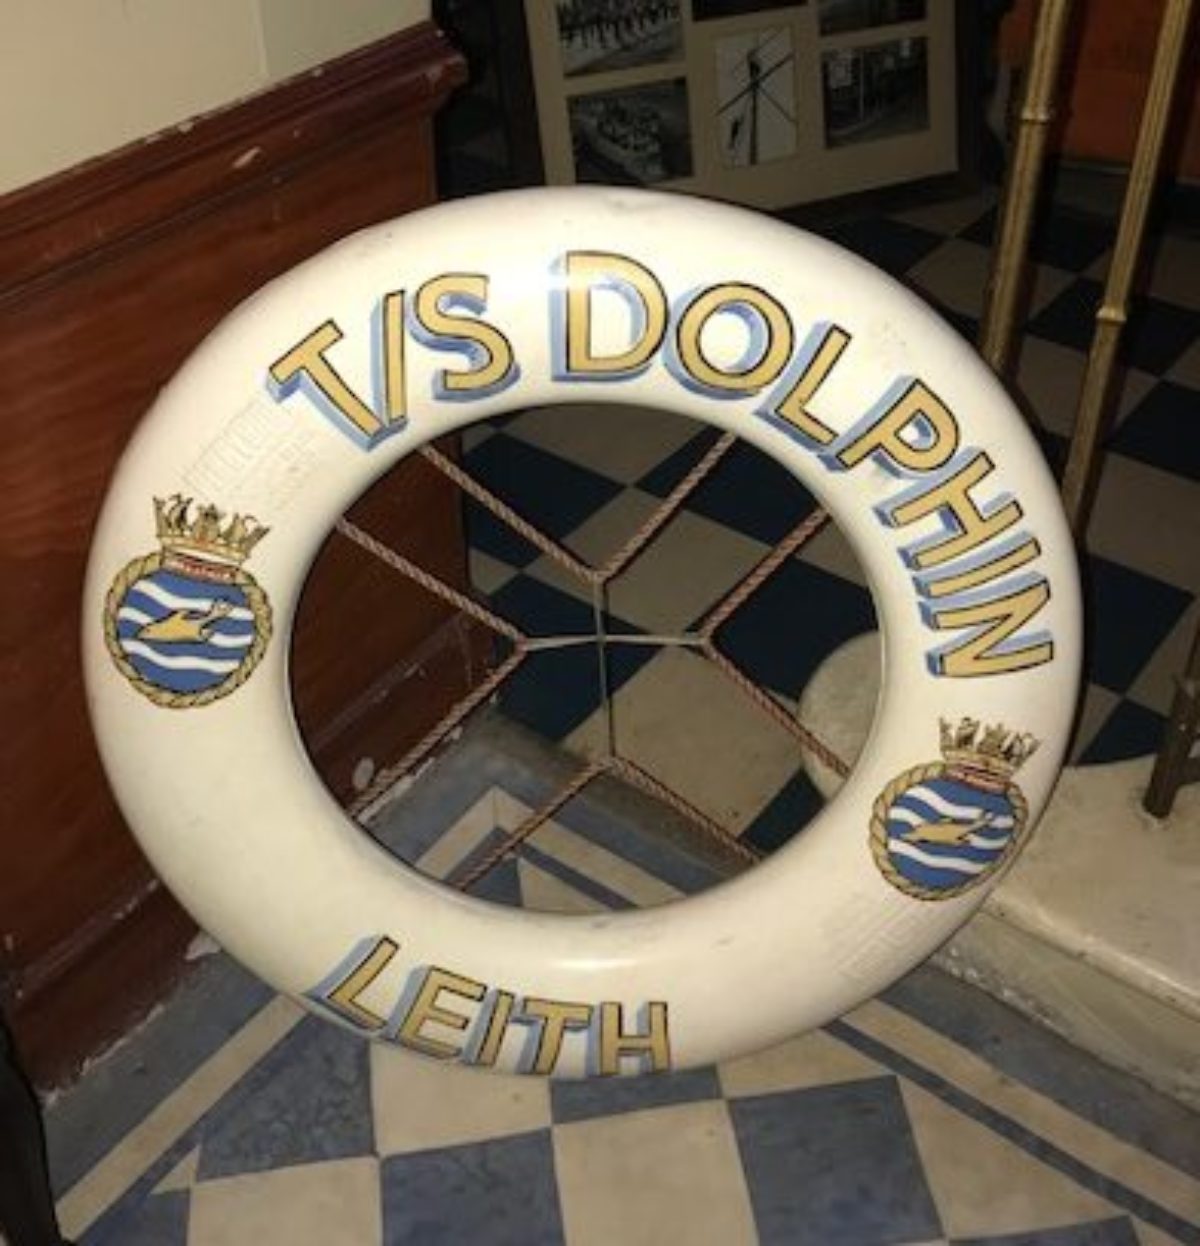 Lifebelt from "The Dolphin" - training ship for Leith Nautical College on display in Trinity House © 2018 Gordon Munro